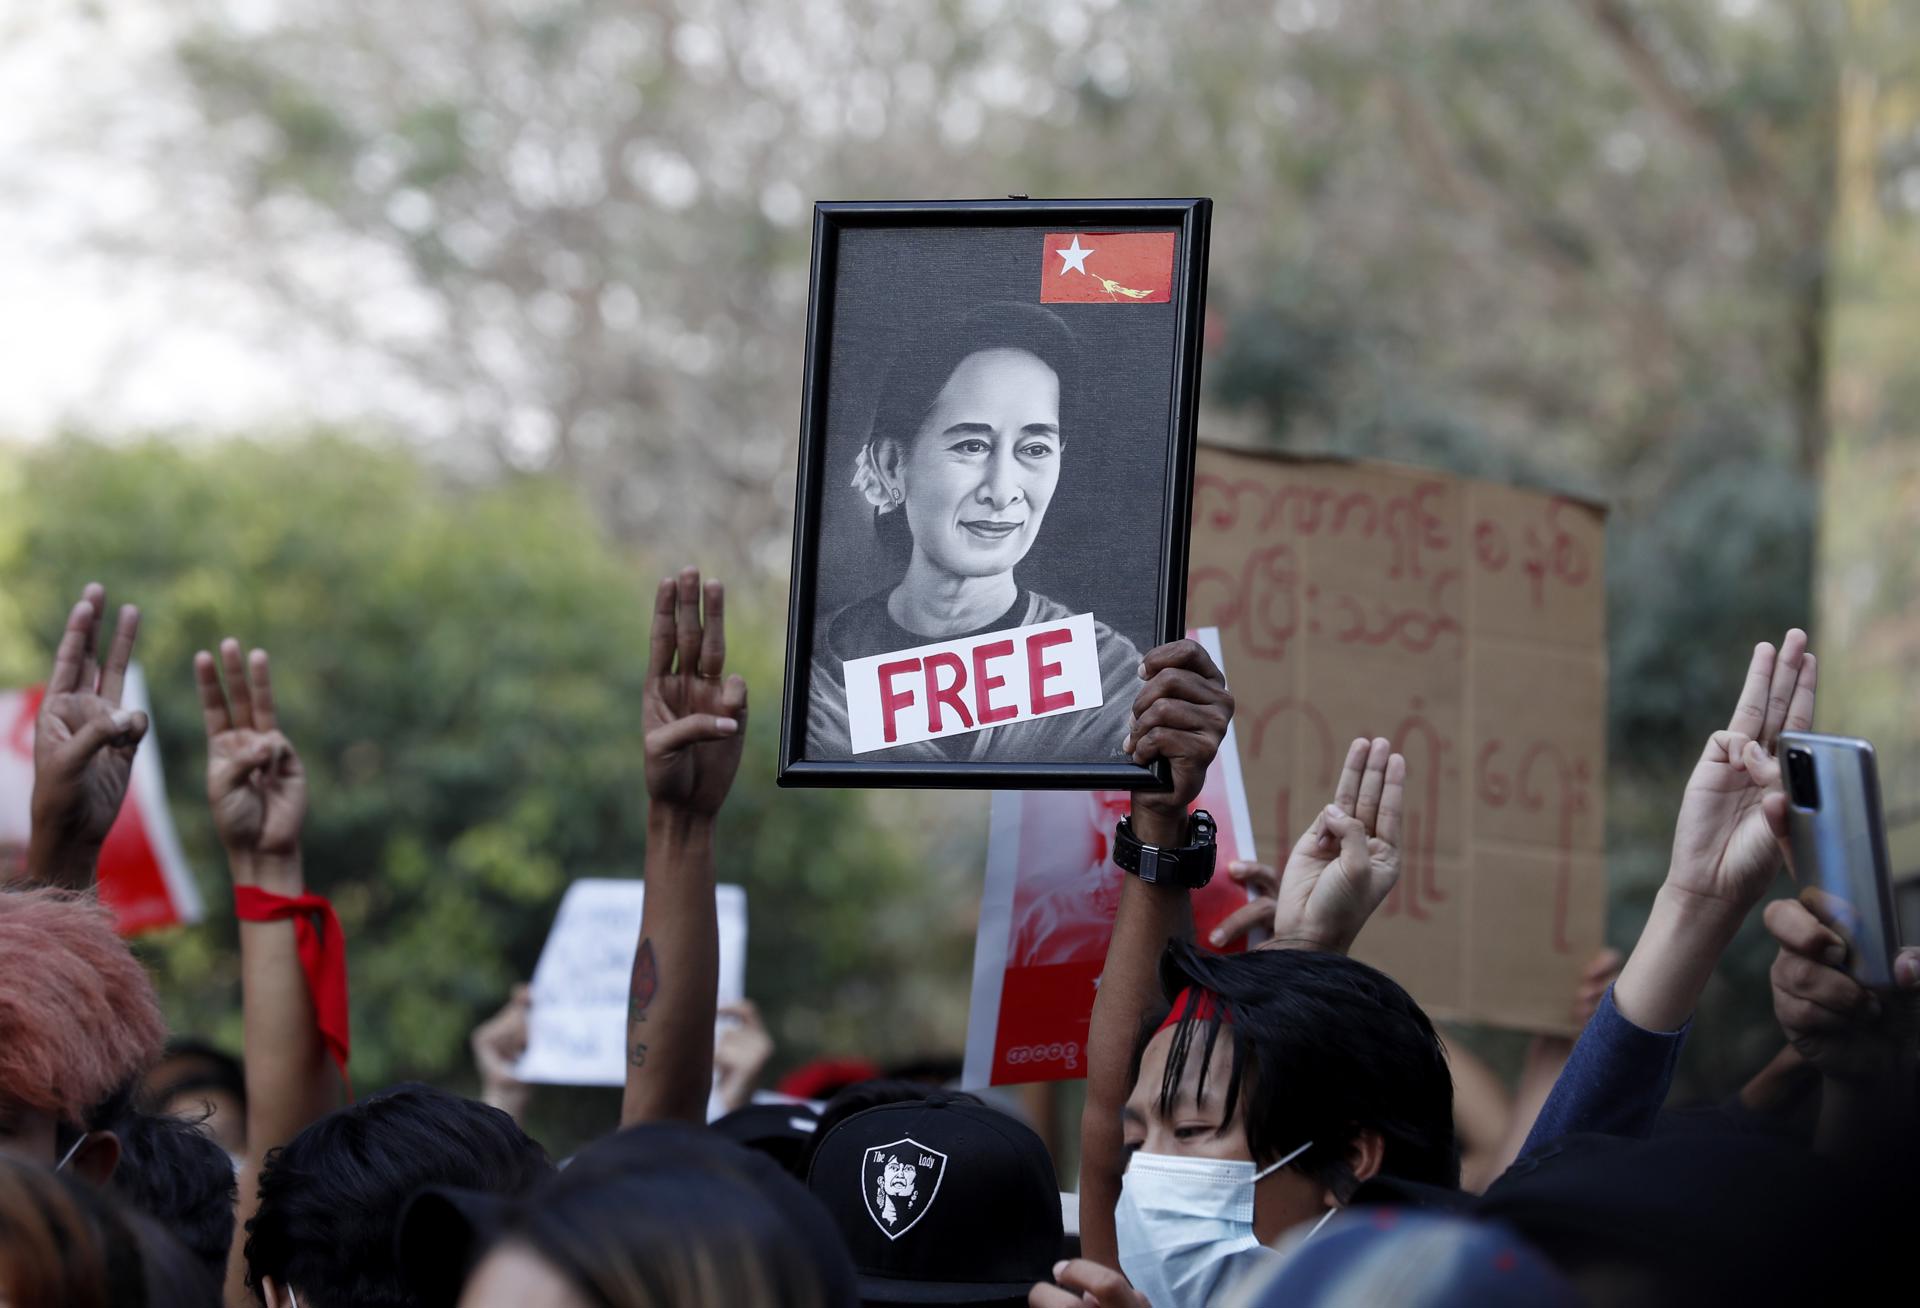 (FILE) - Demonstrators hold a portrait of detained State Counselor Aung San Suu Kyi while flashing the three-finger salute, a symbol of resistance, during an anti- military protest at Hledan junction in Yangon, Myanmar, 08 February 2021. EFE/EPA/STRINGER